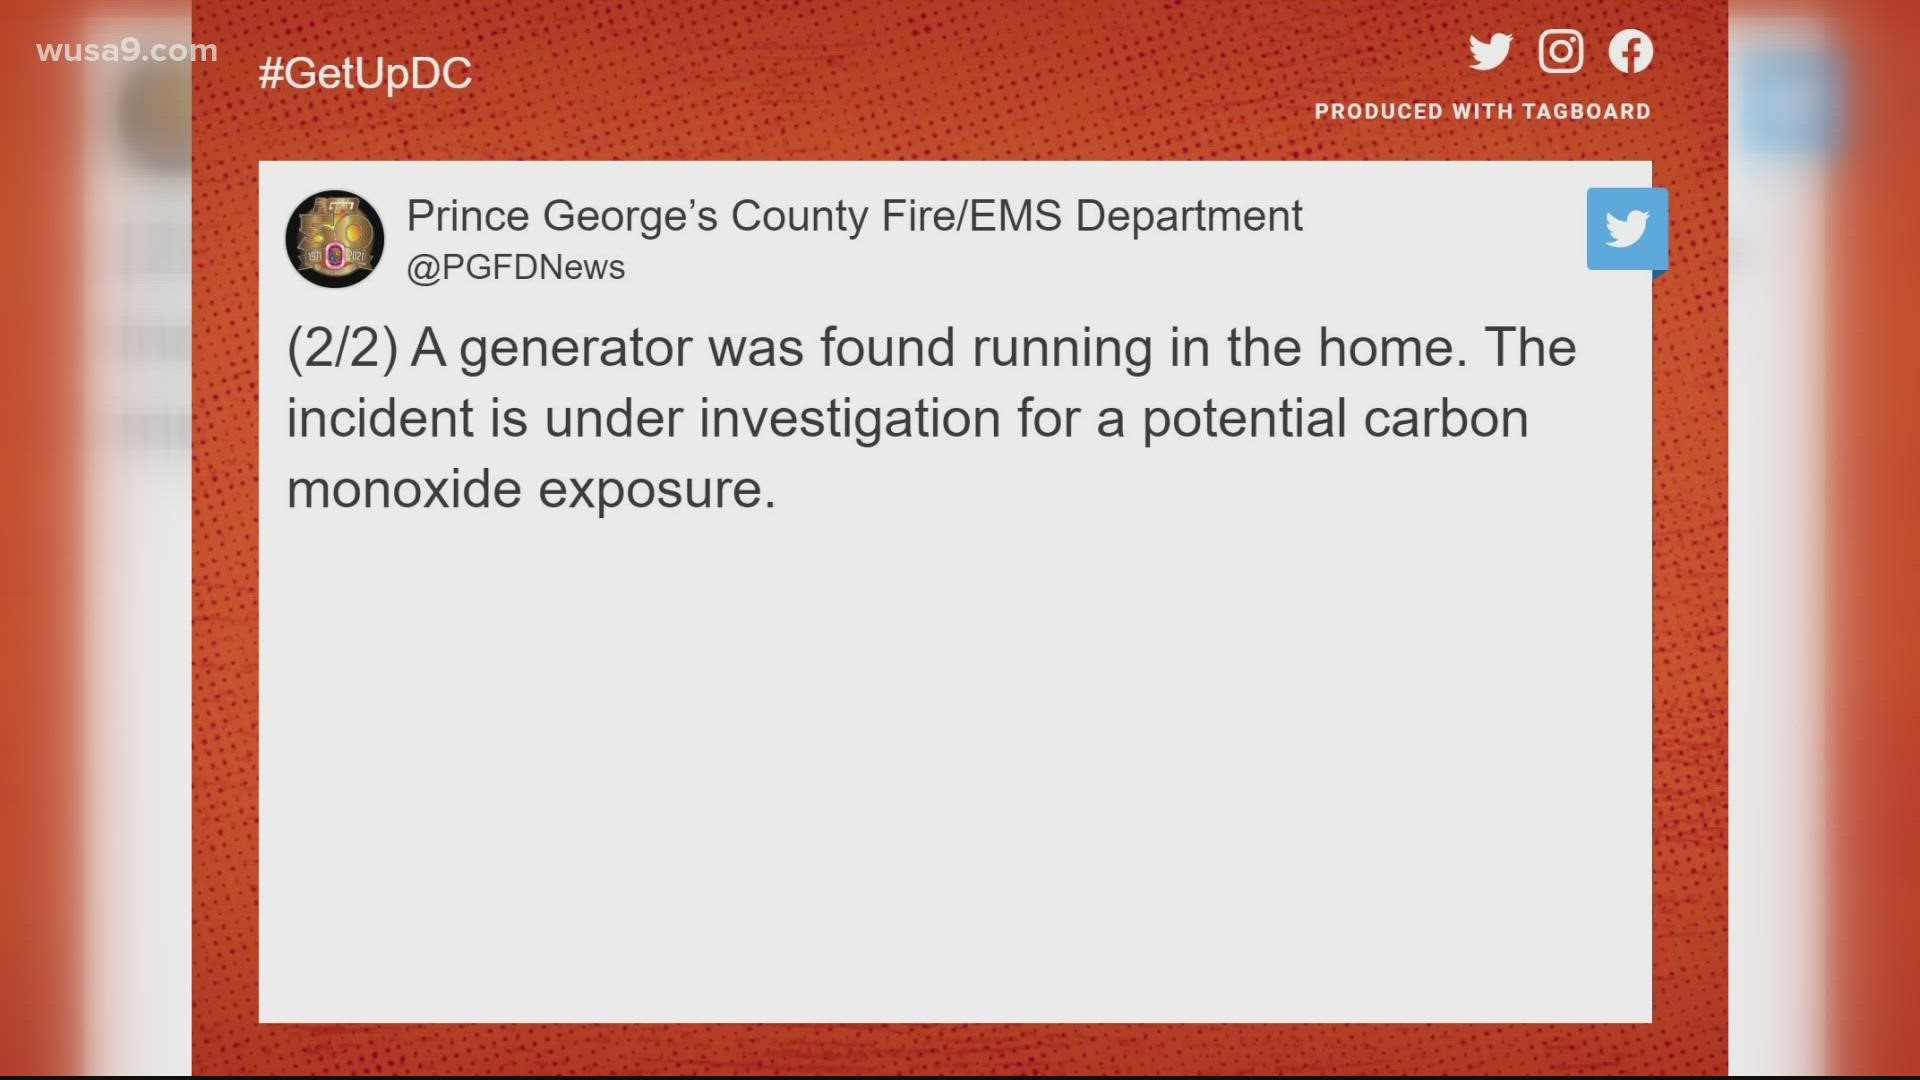 Prince George's County Fire and EMS officials are working to determine whether the people died from carbon monoxide exposure.